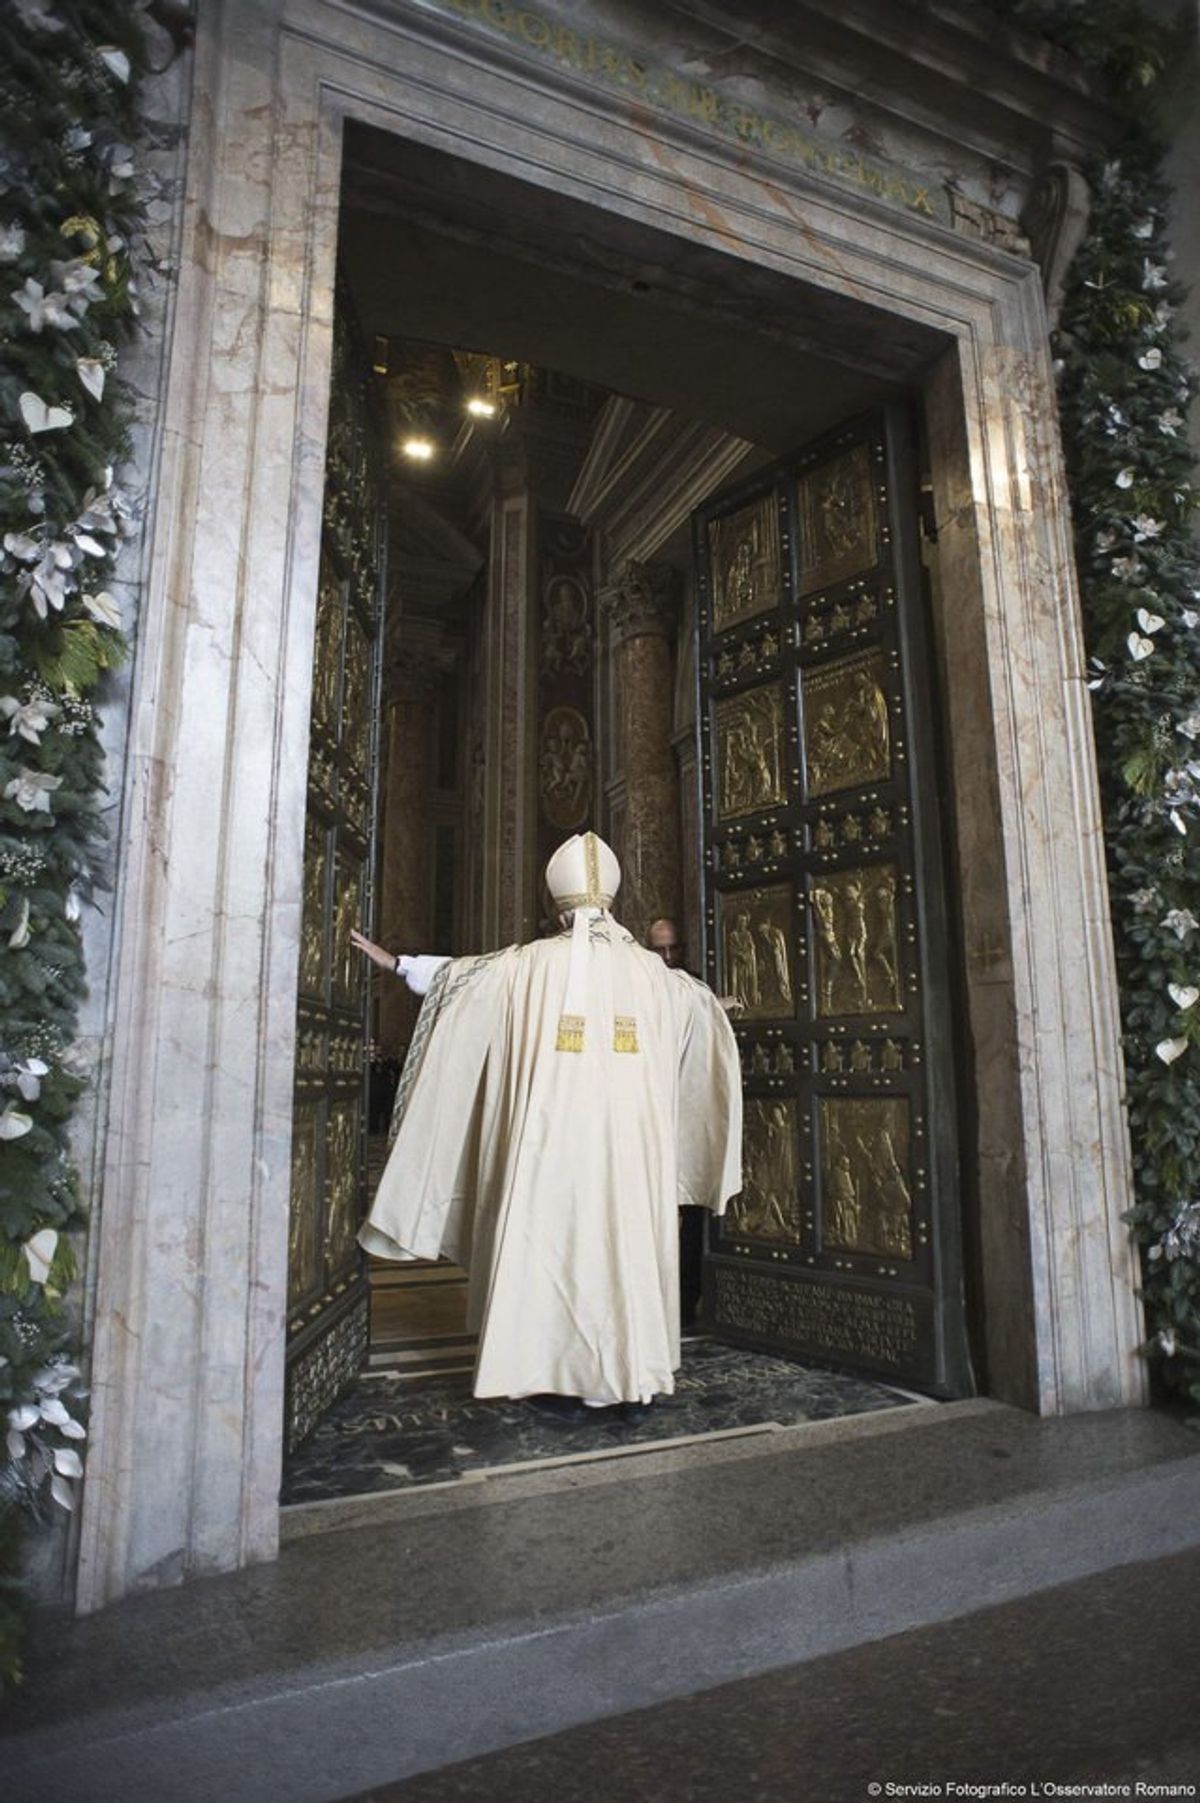 Why The Holy Doors Aren't So Holy